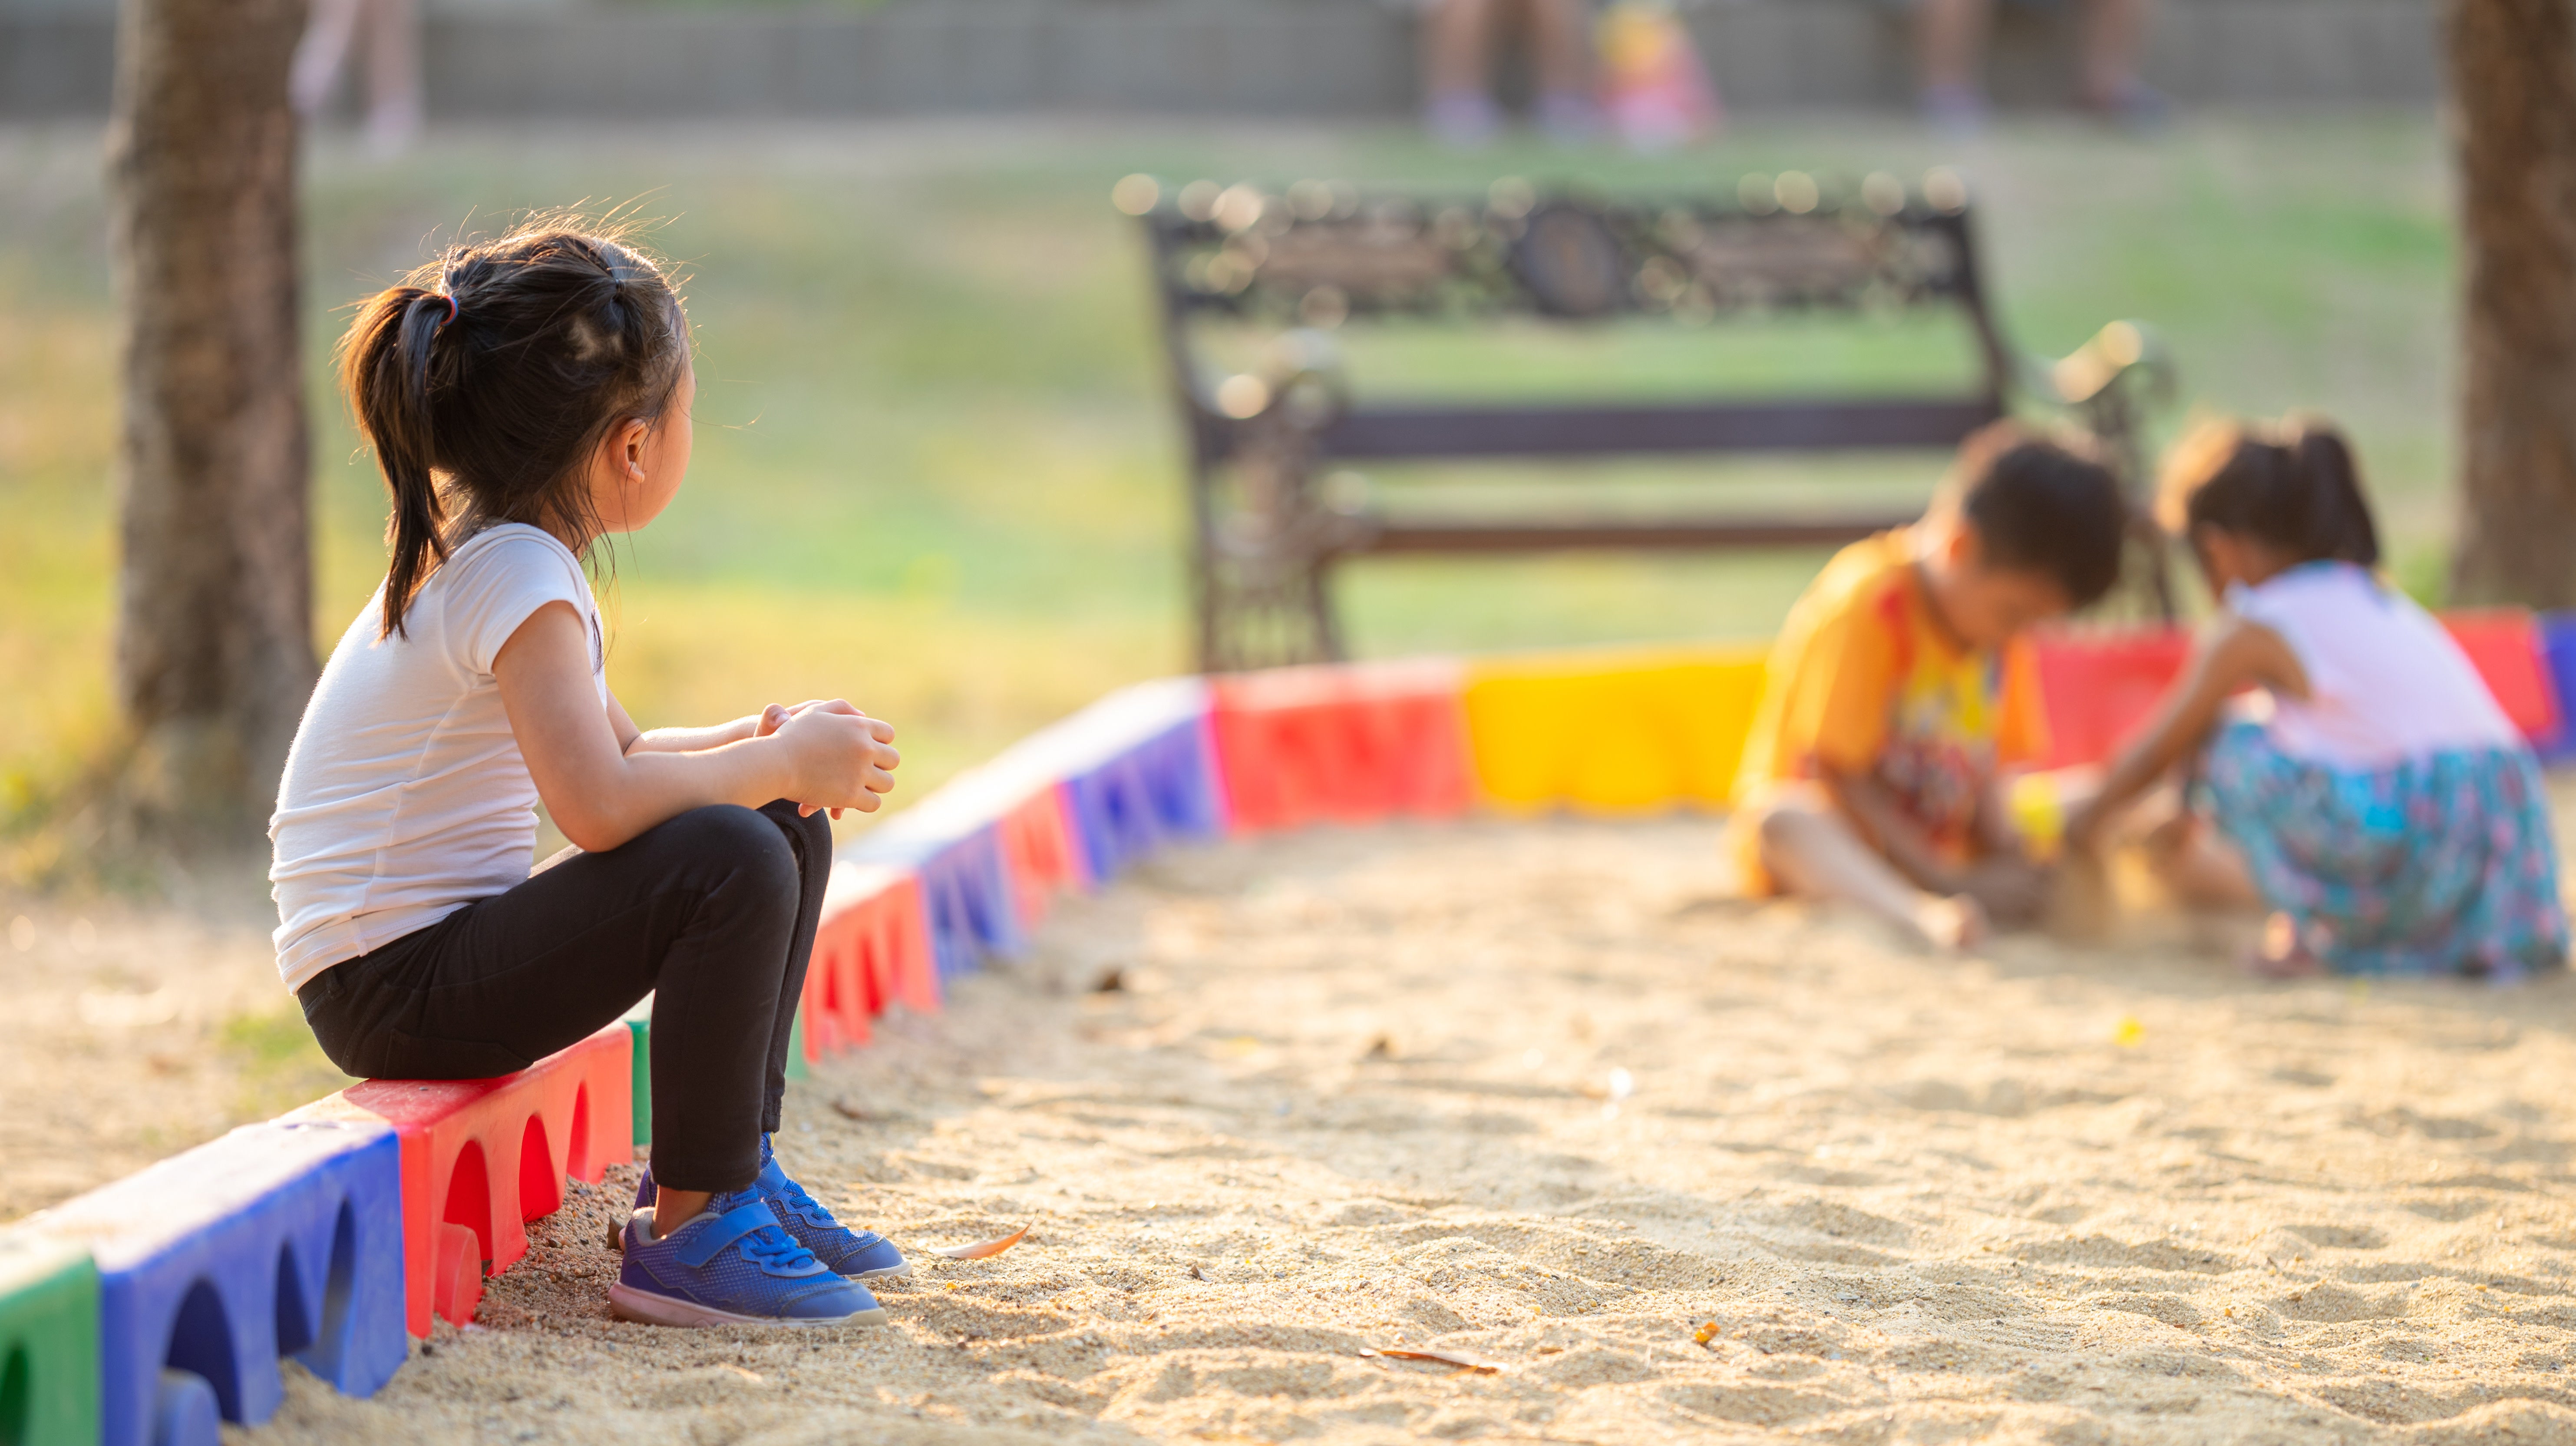 What To Do When Your Kid Has Trouble Making Friends